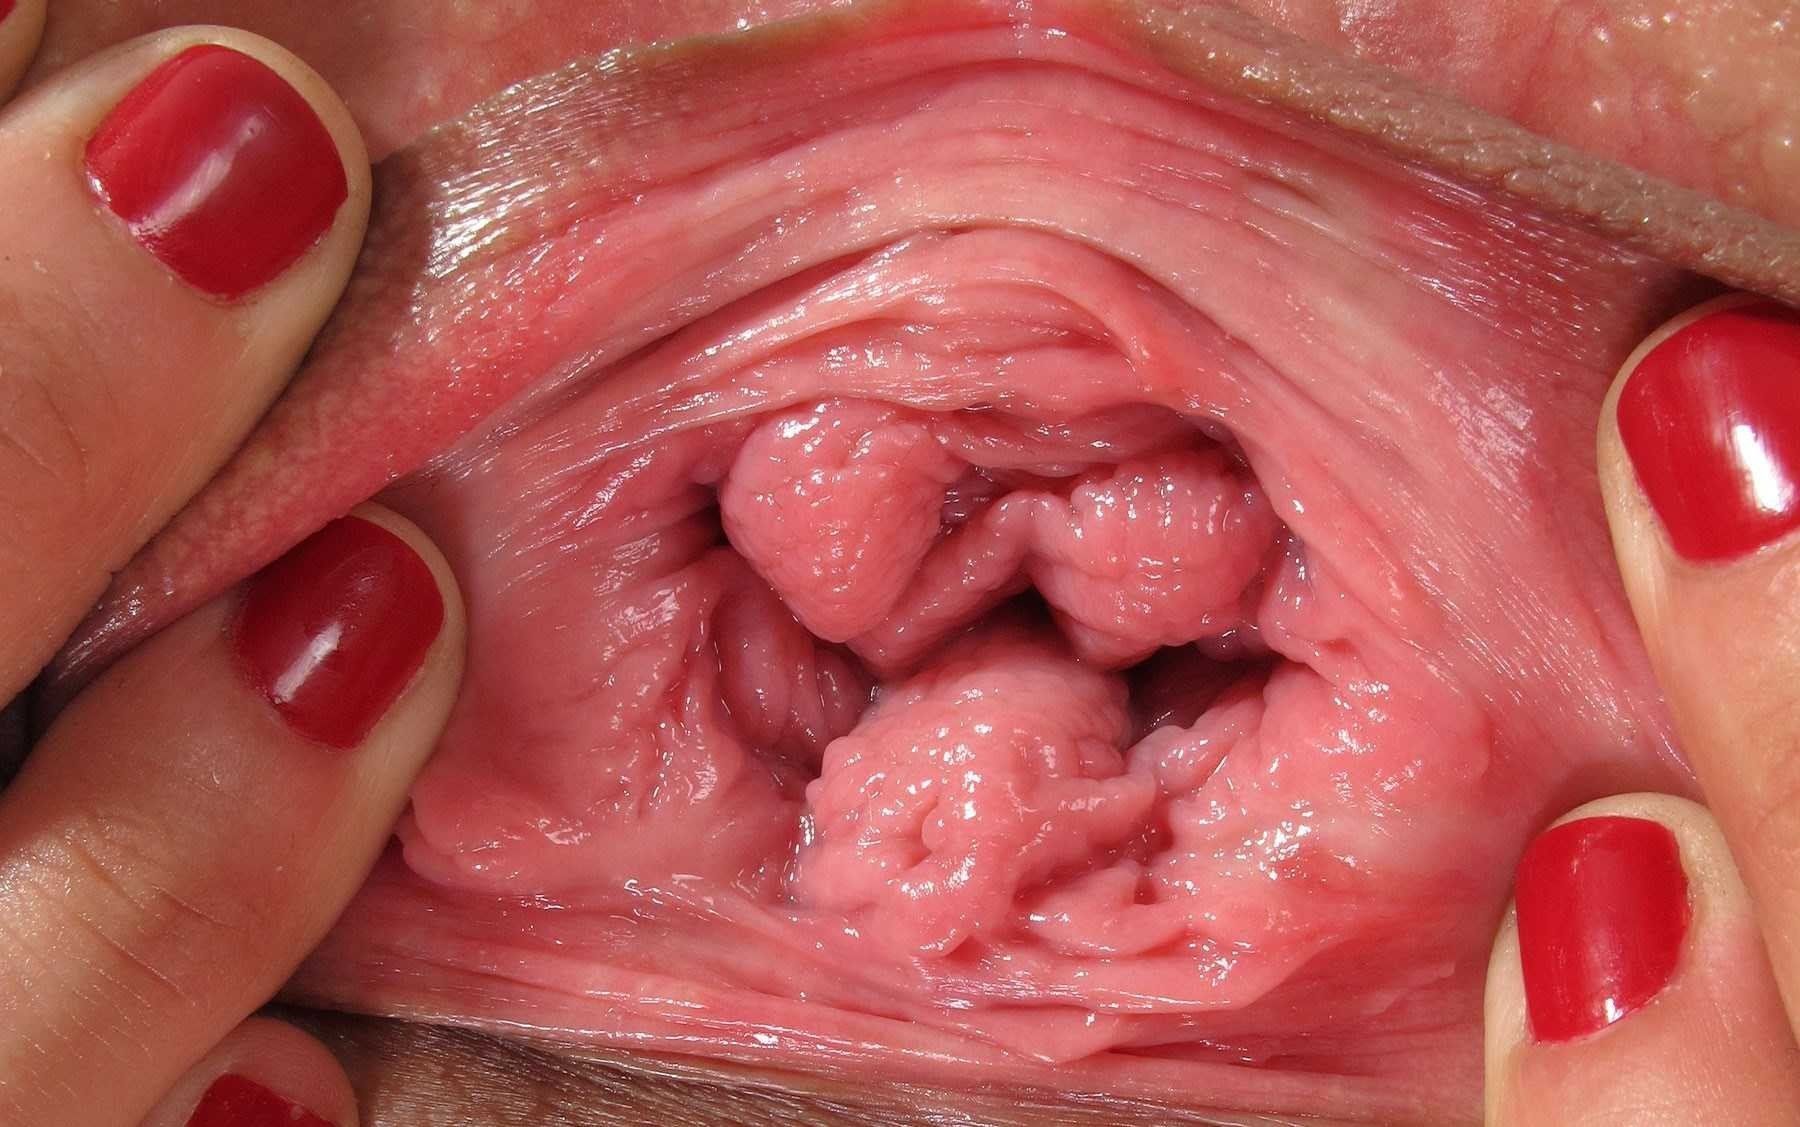 Inside pussy close up